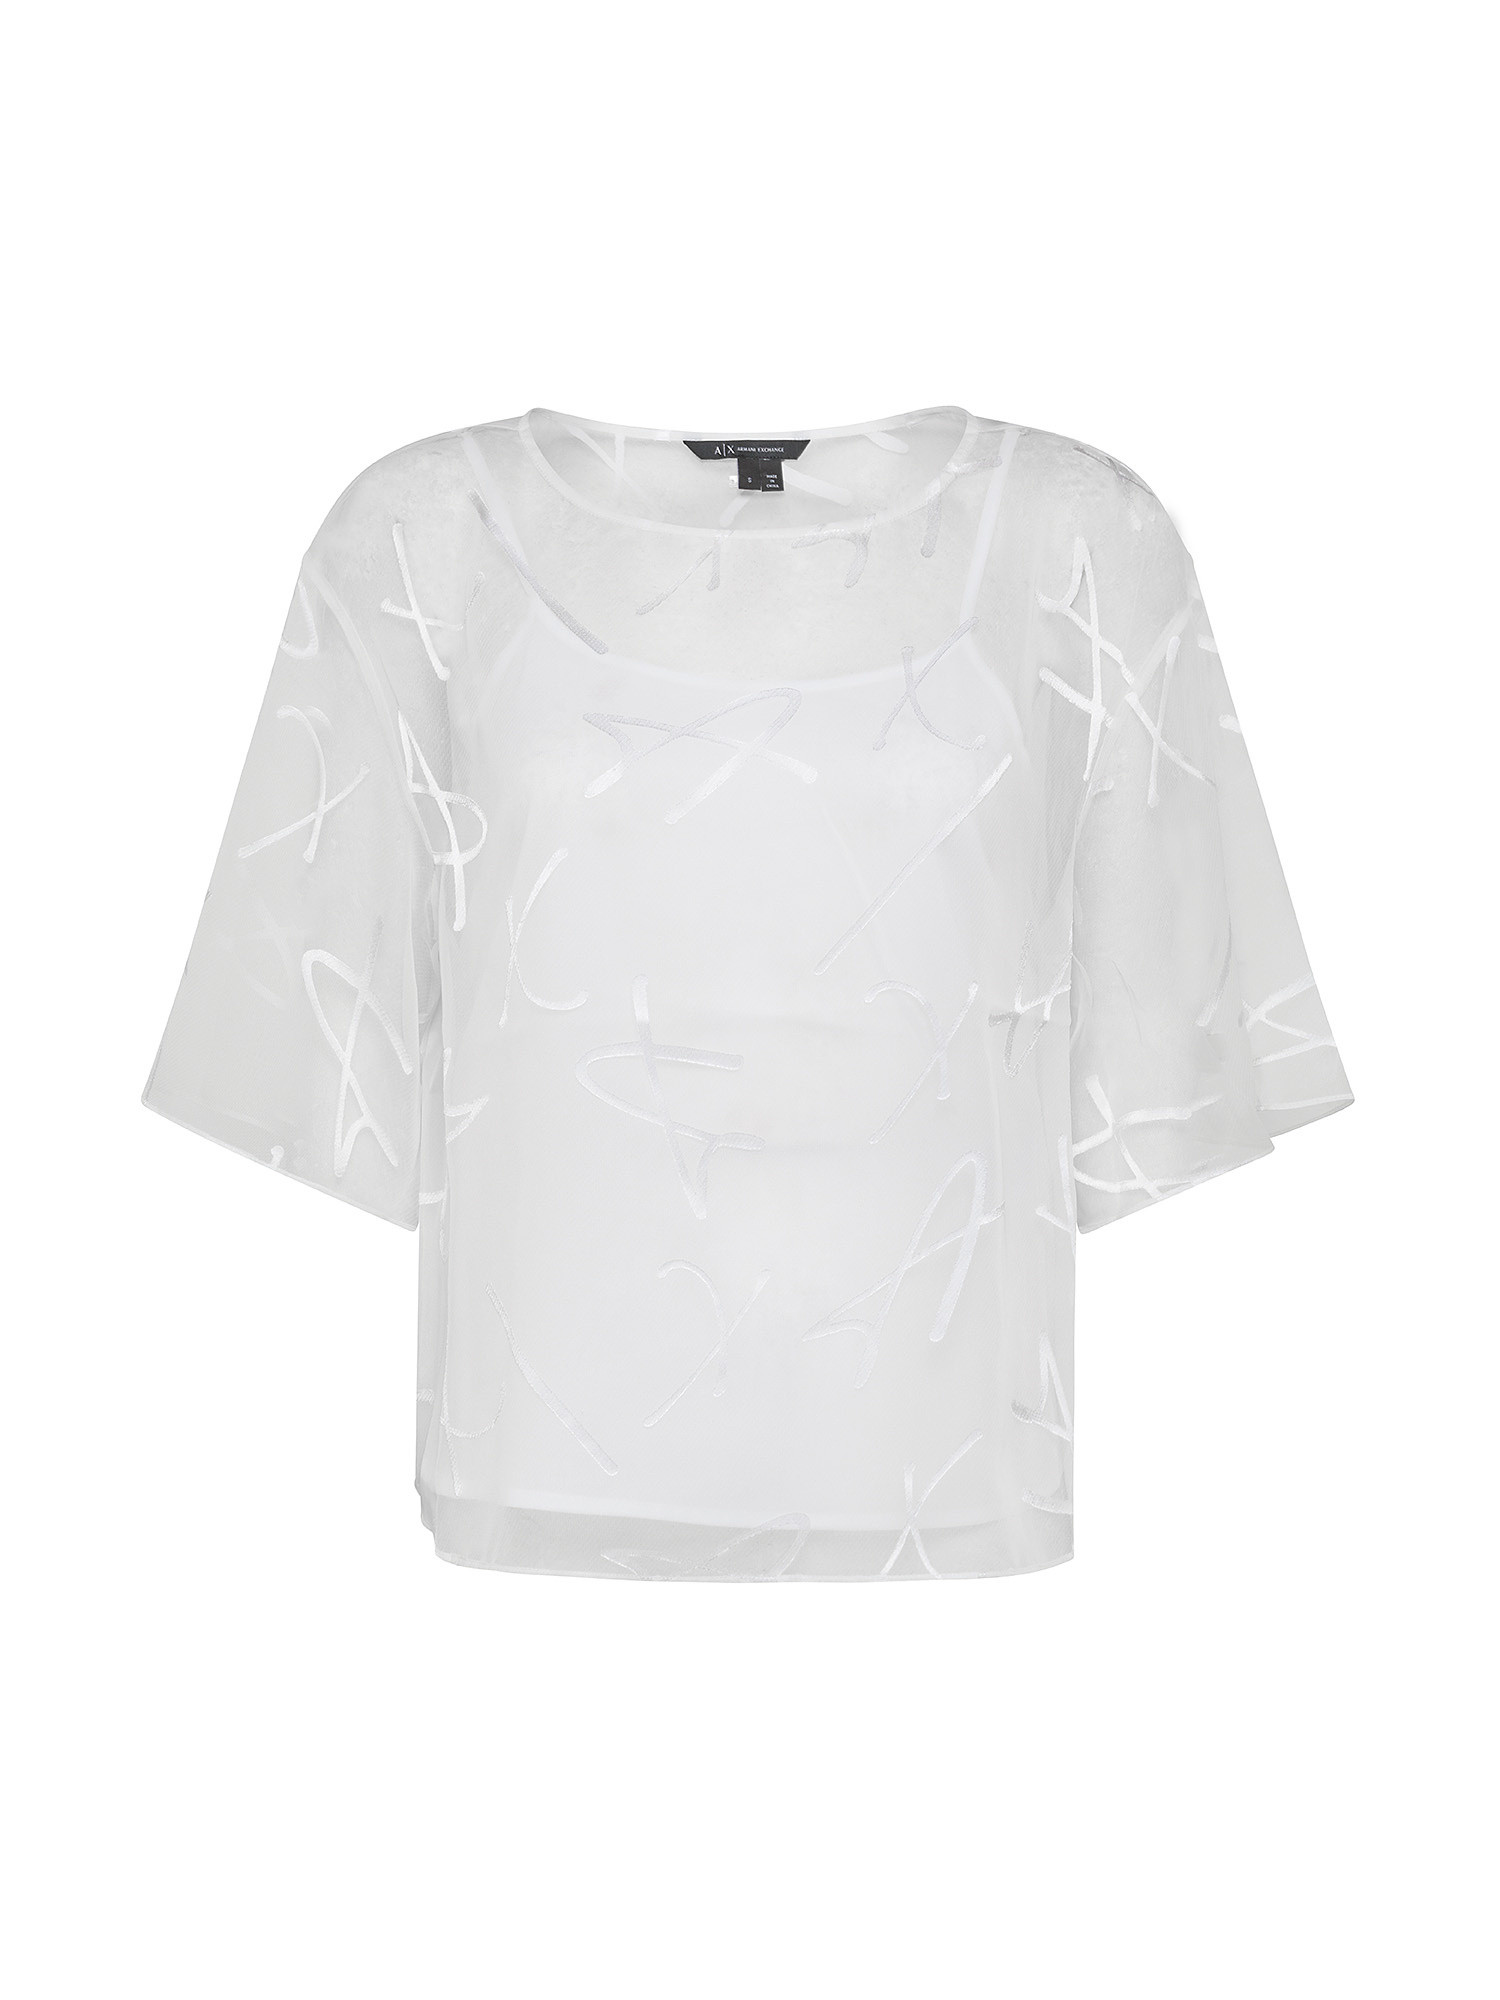 Armani Exchange - Blouse with all over logo lettering, White, large image number 0